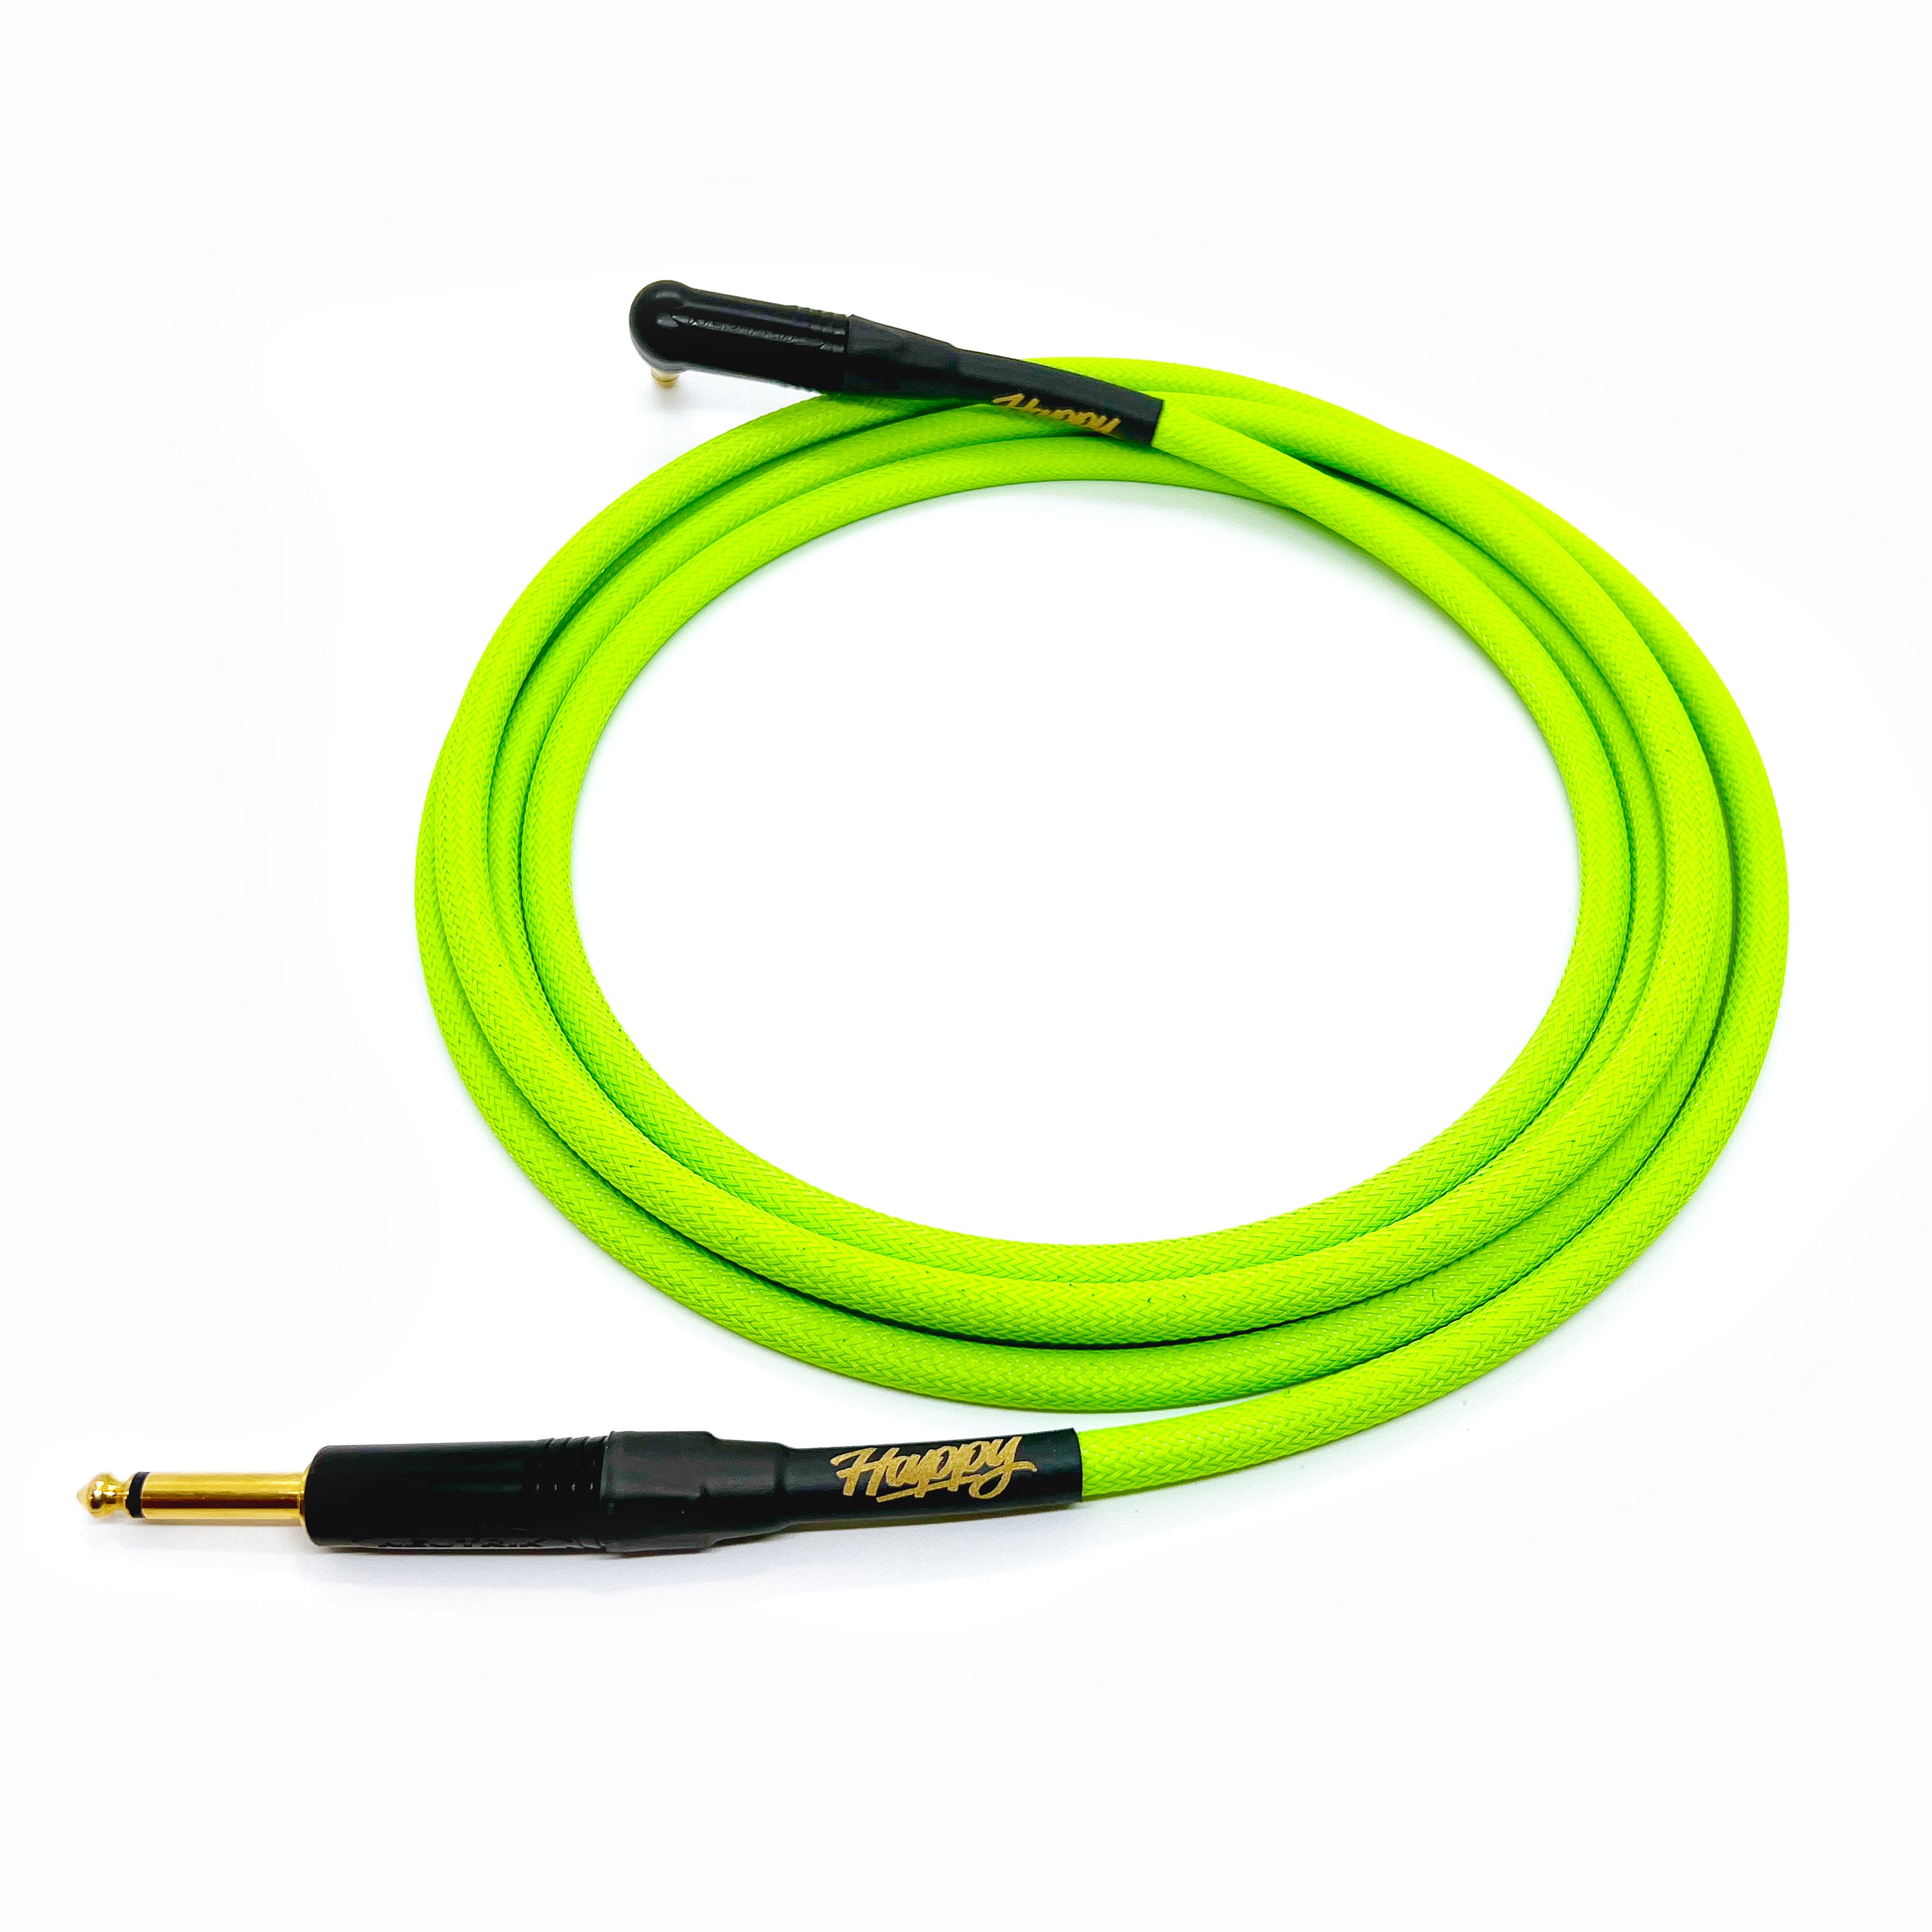 The Elite Instrument Cable - Lambo Green